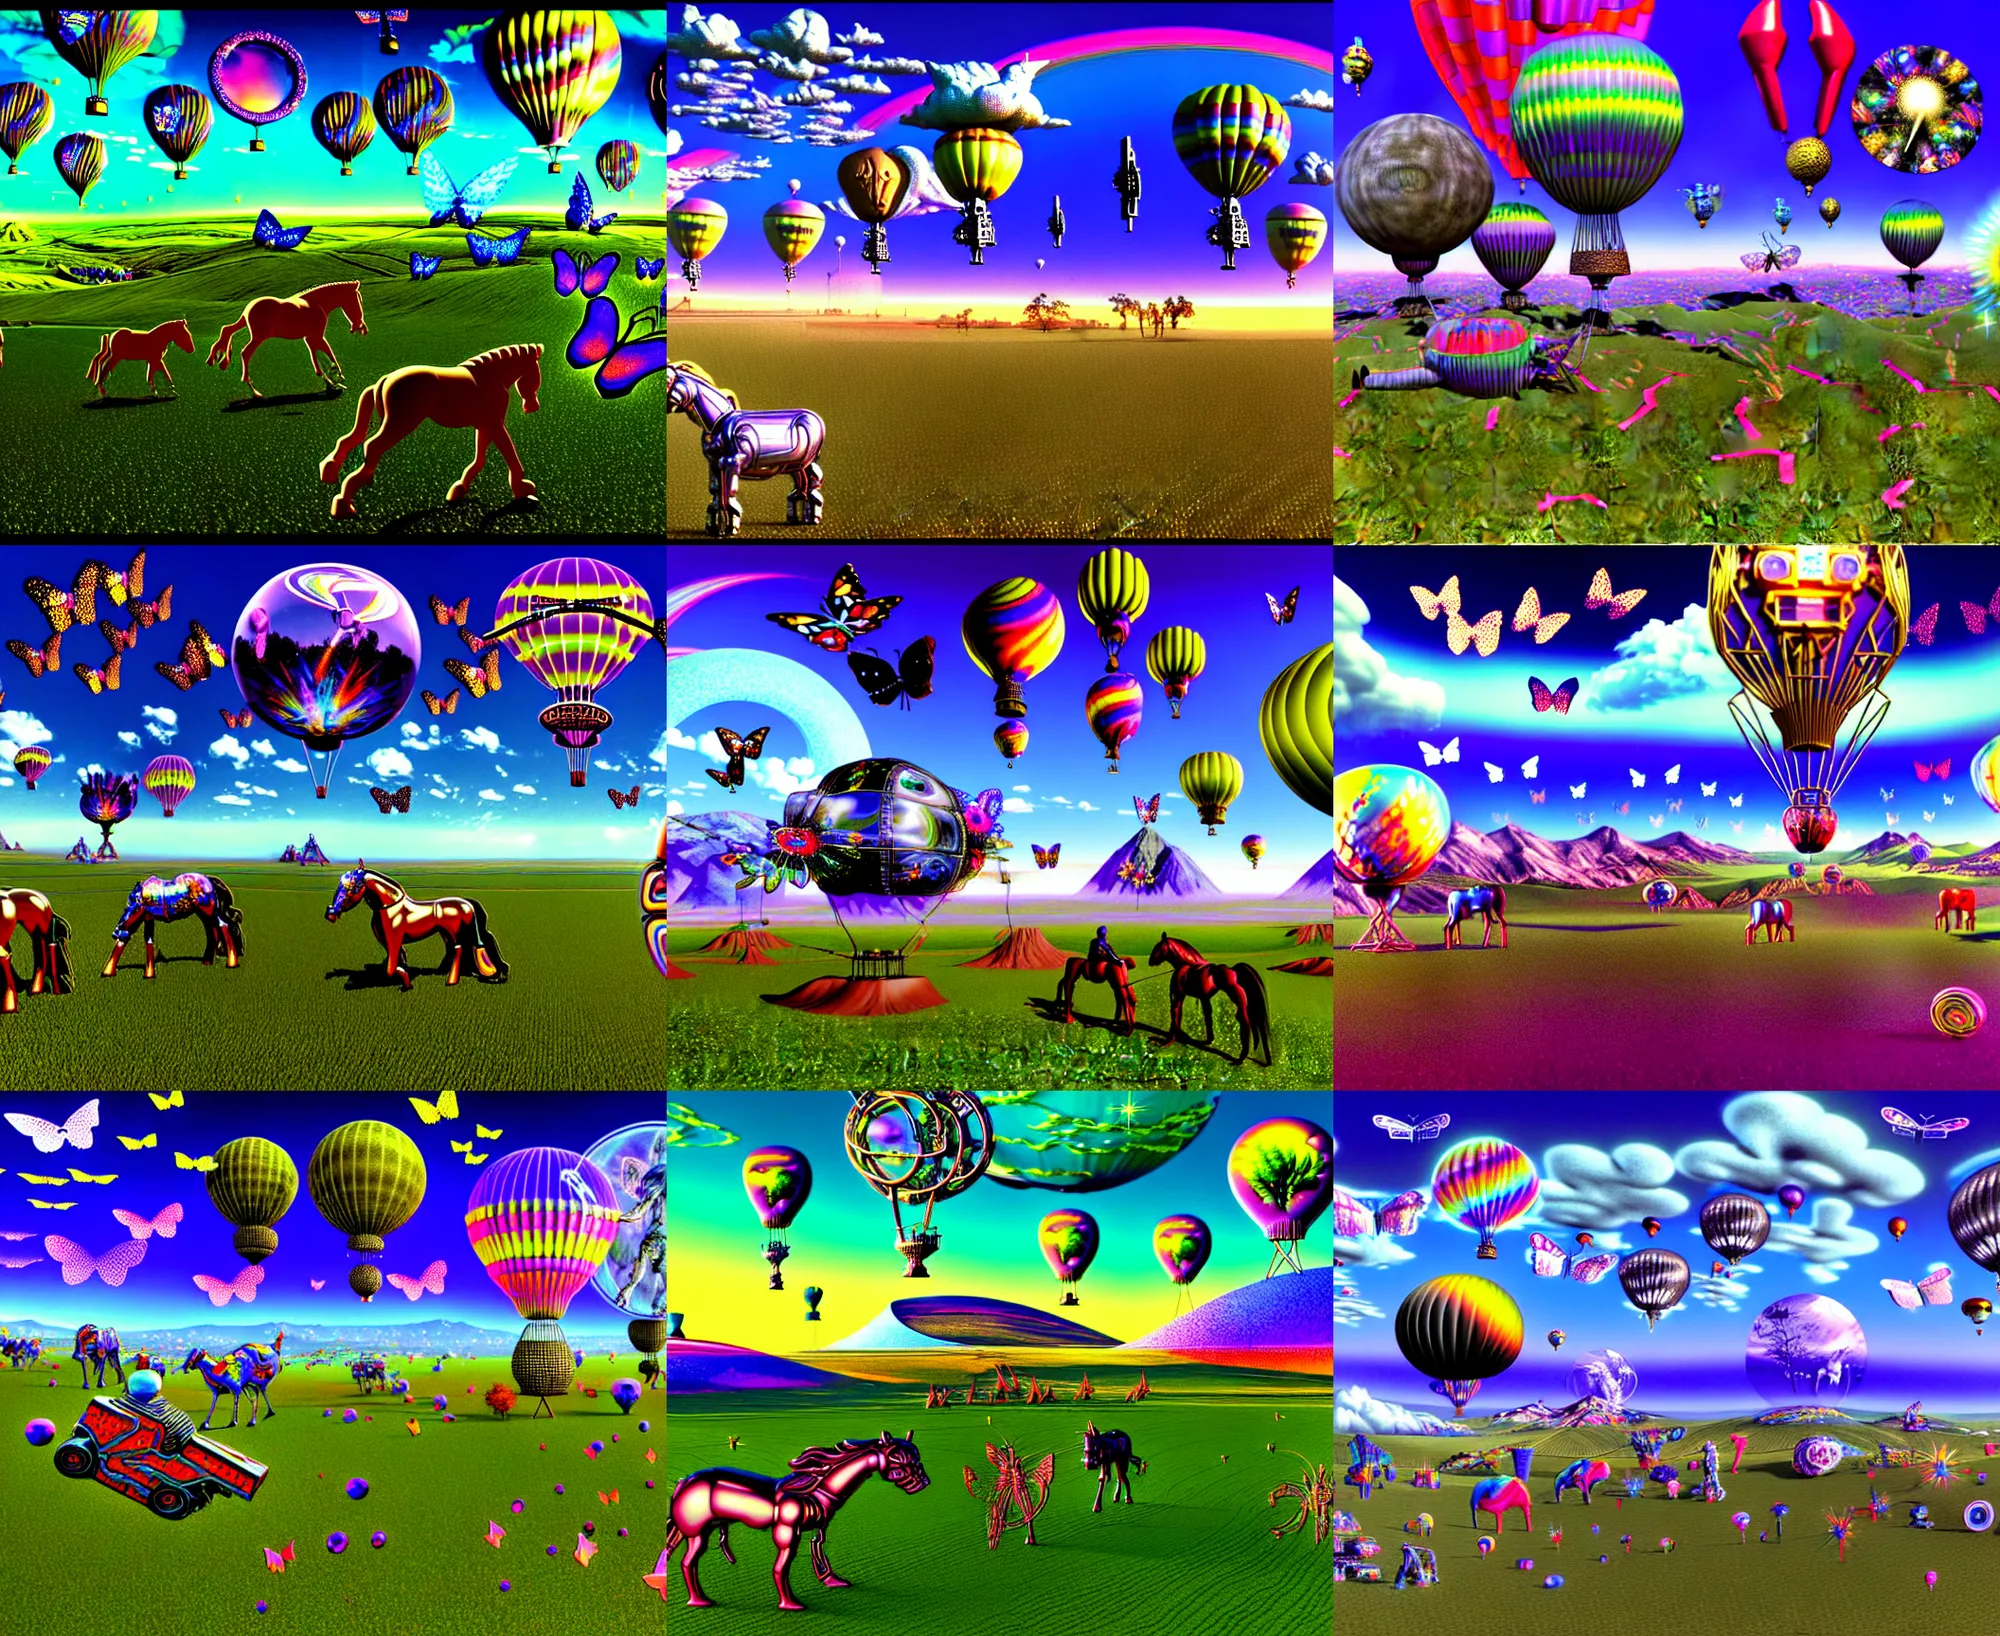 Prompt: 3 d render of cybernetic landscape with cyborg horses and hot air balloons with angel wings against a psychedelic surreal background with 3 d butterflies and 3 d flowers n the style of 1 9 9 0's cg graphics, lsd dream emulator psx, 3 d rendered y 2 k aesthetic by ichiro tanida, 3 do magazine, wide shot